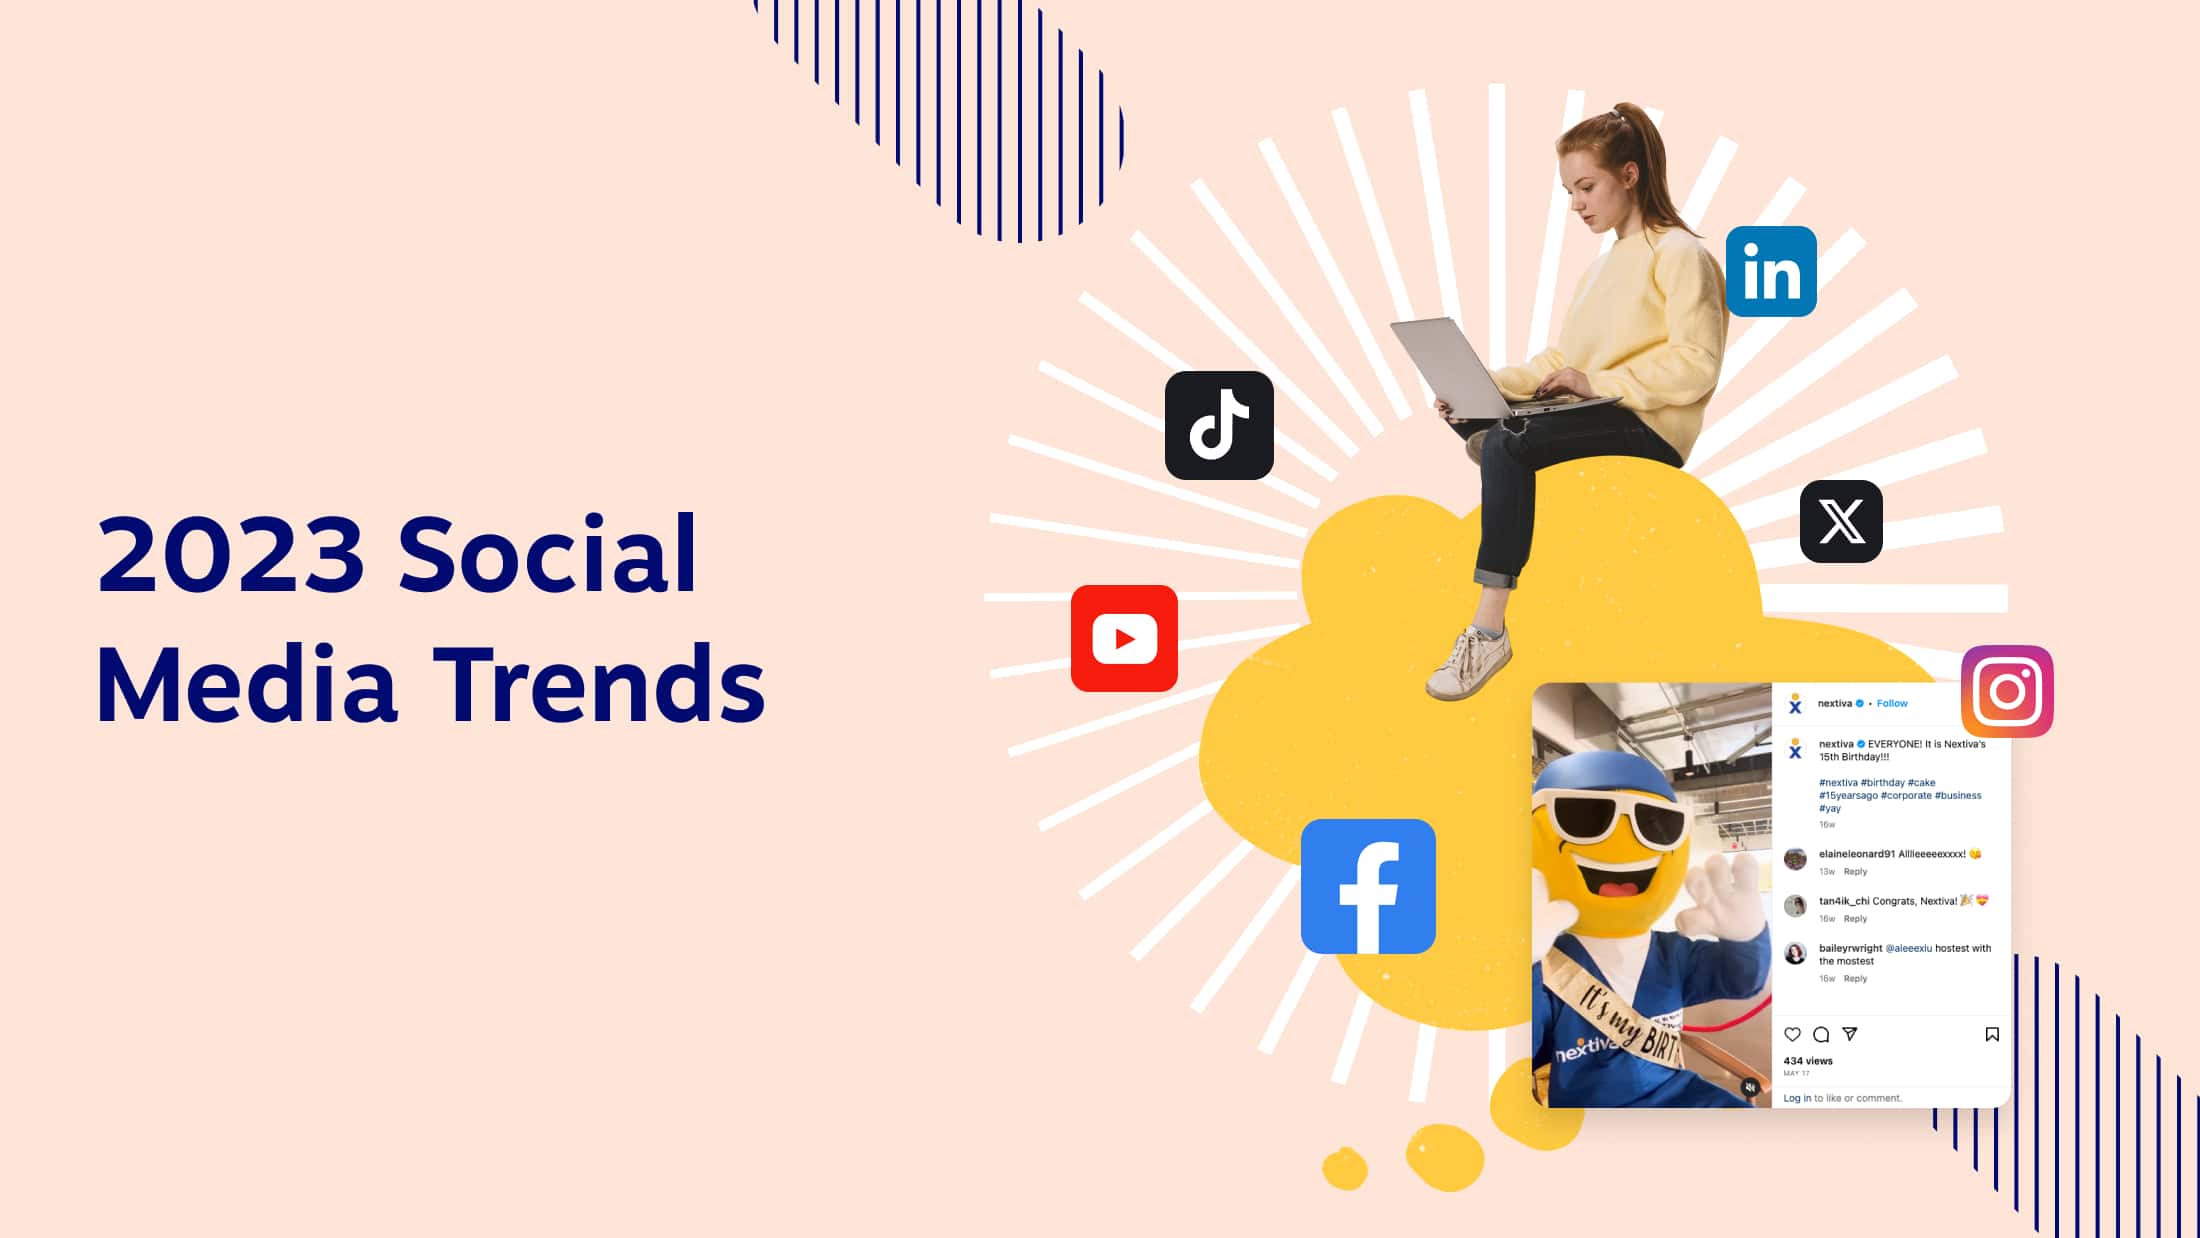 Noteworthy Social Media Trends for Business Growth in 2023